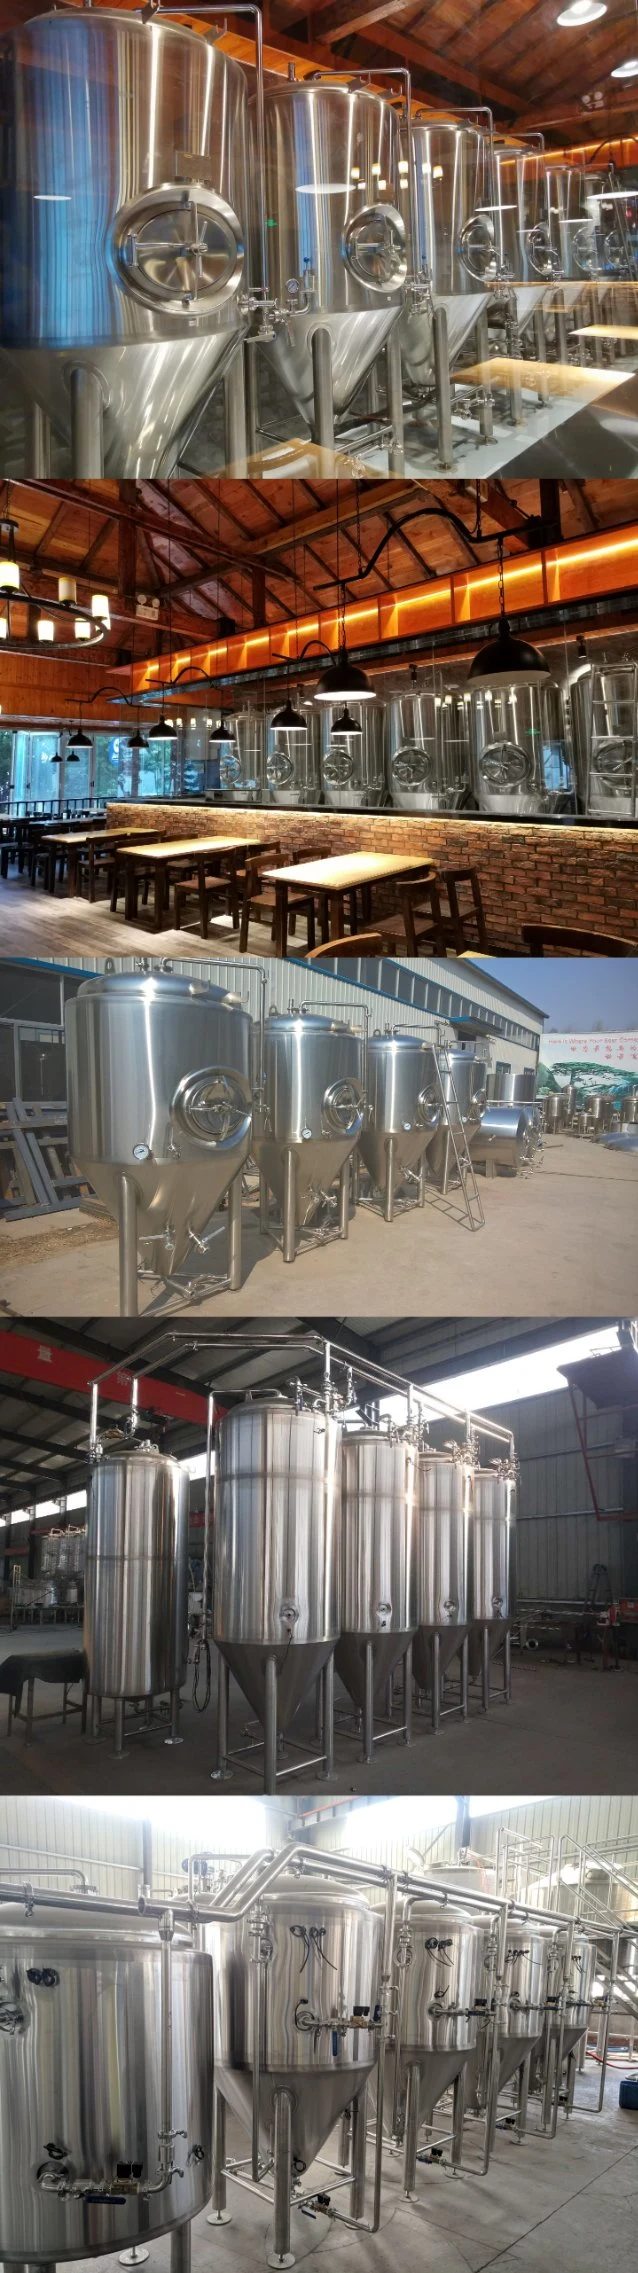 Craft Beer Brewing Equipment 5bbl-10bbl Commercial Brewhouse Brewery